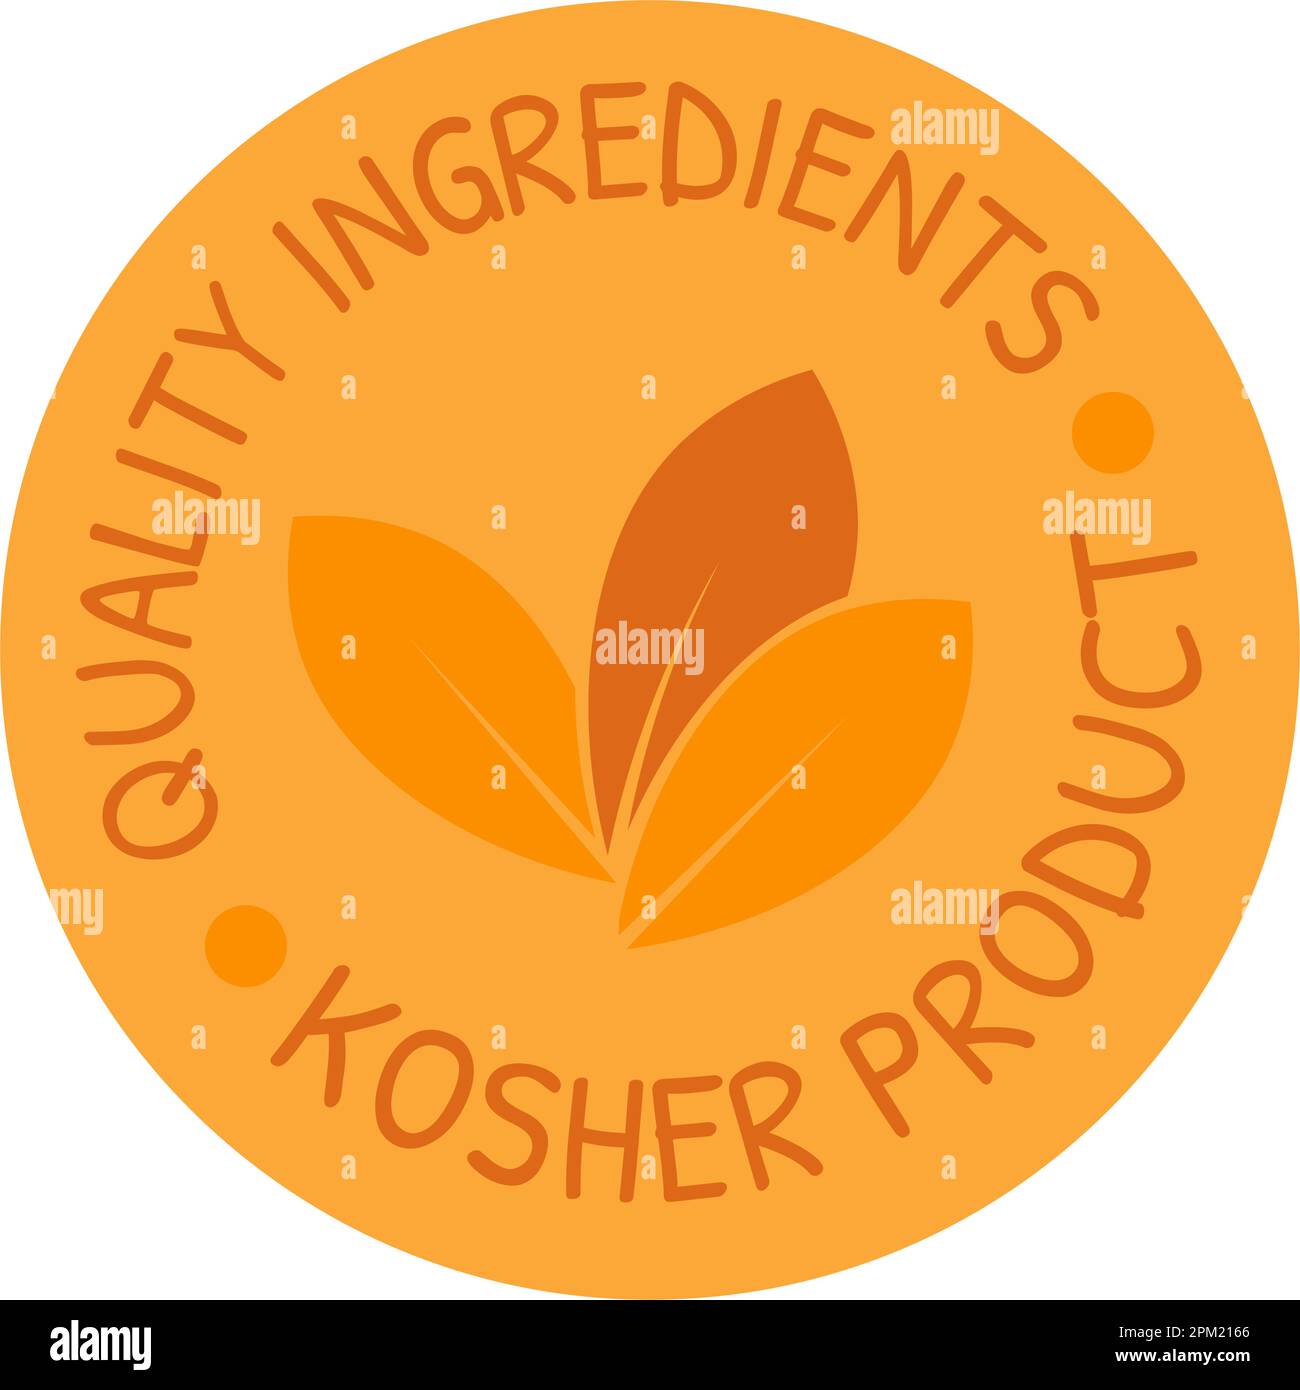 Quality ingredients of kosher product, package Stock Vector